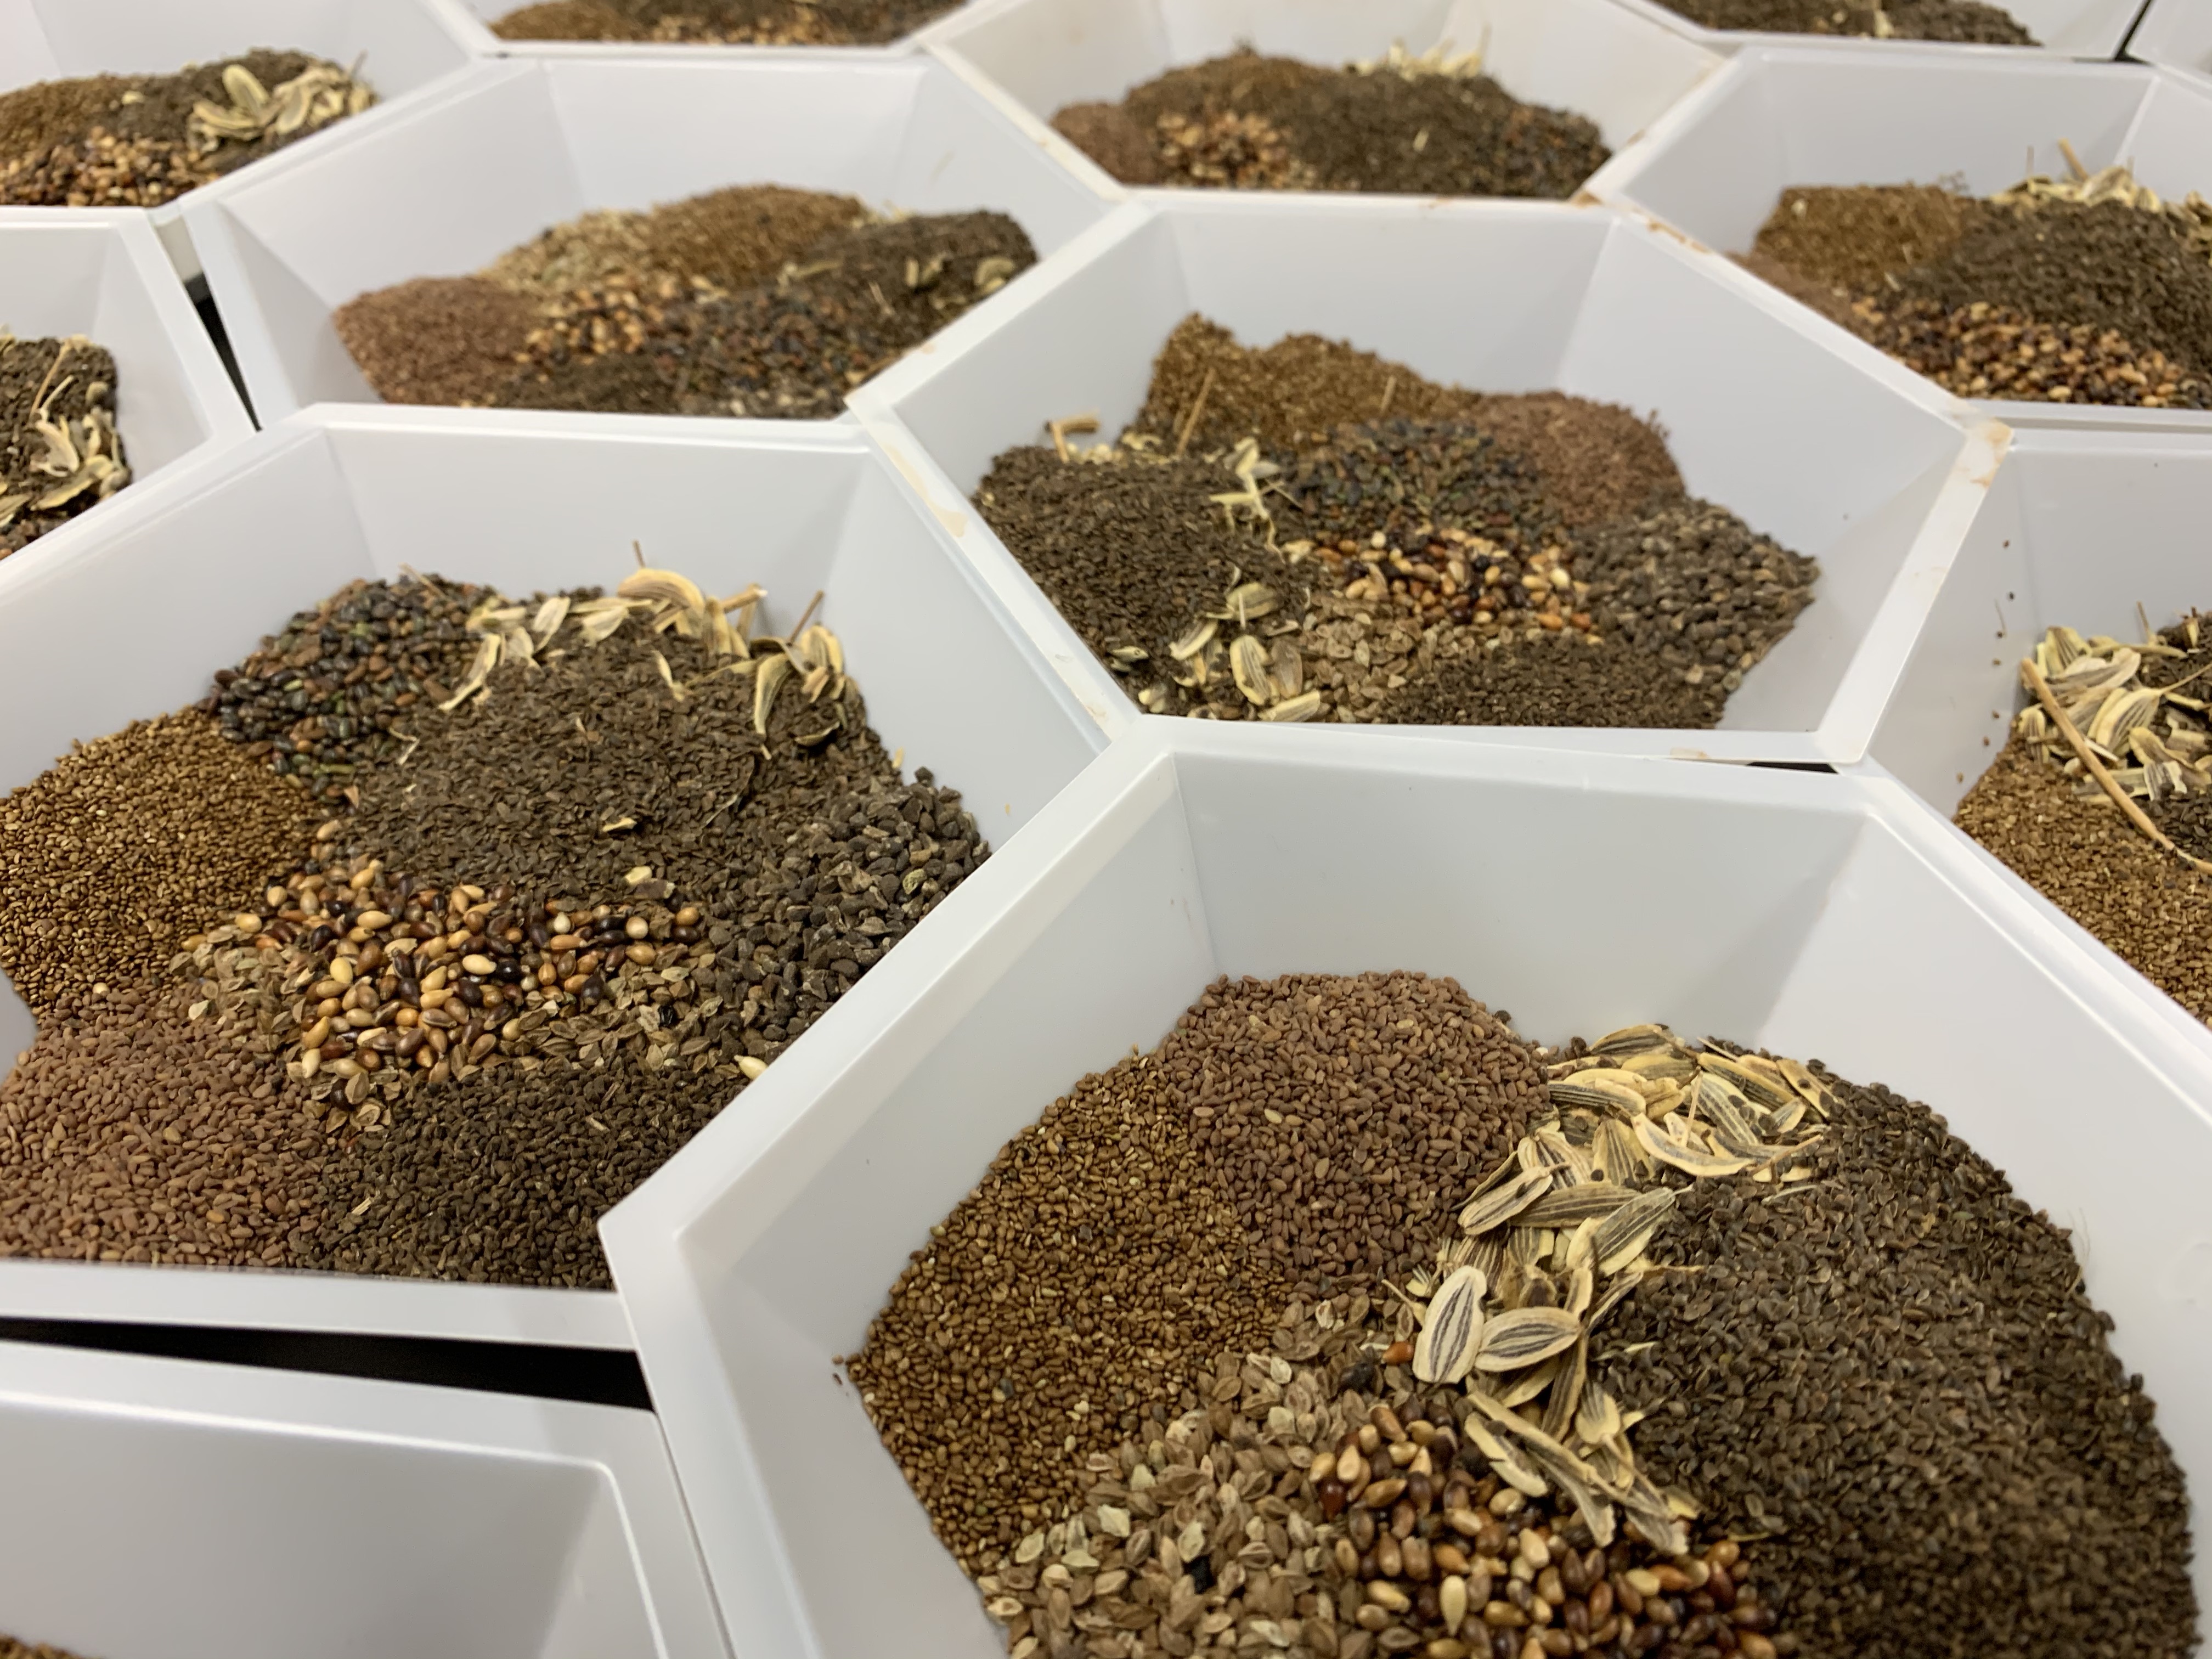 Seed mix for understory experiment.